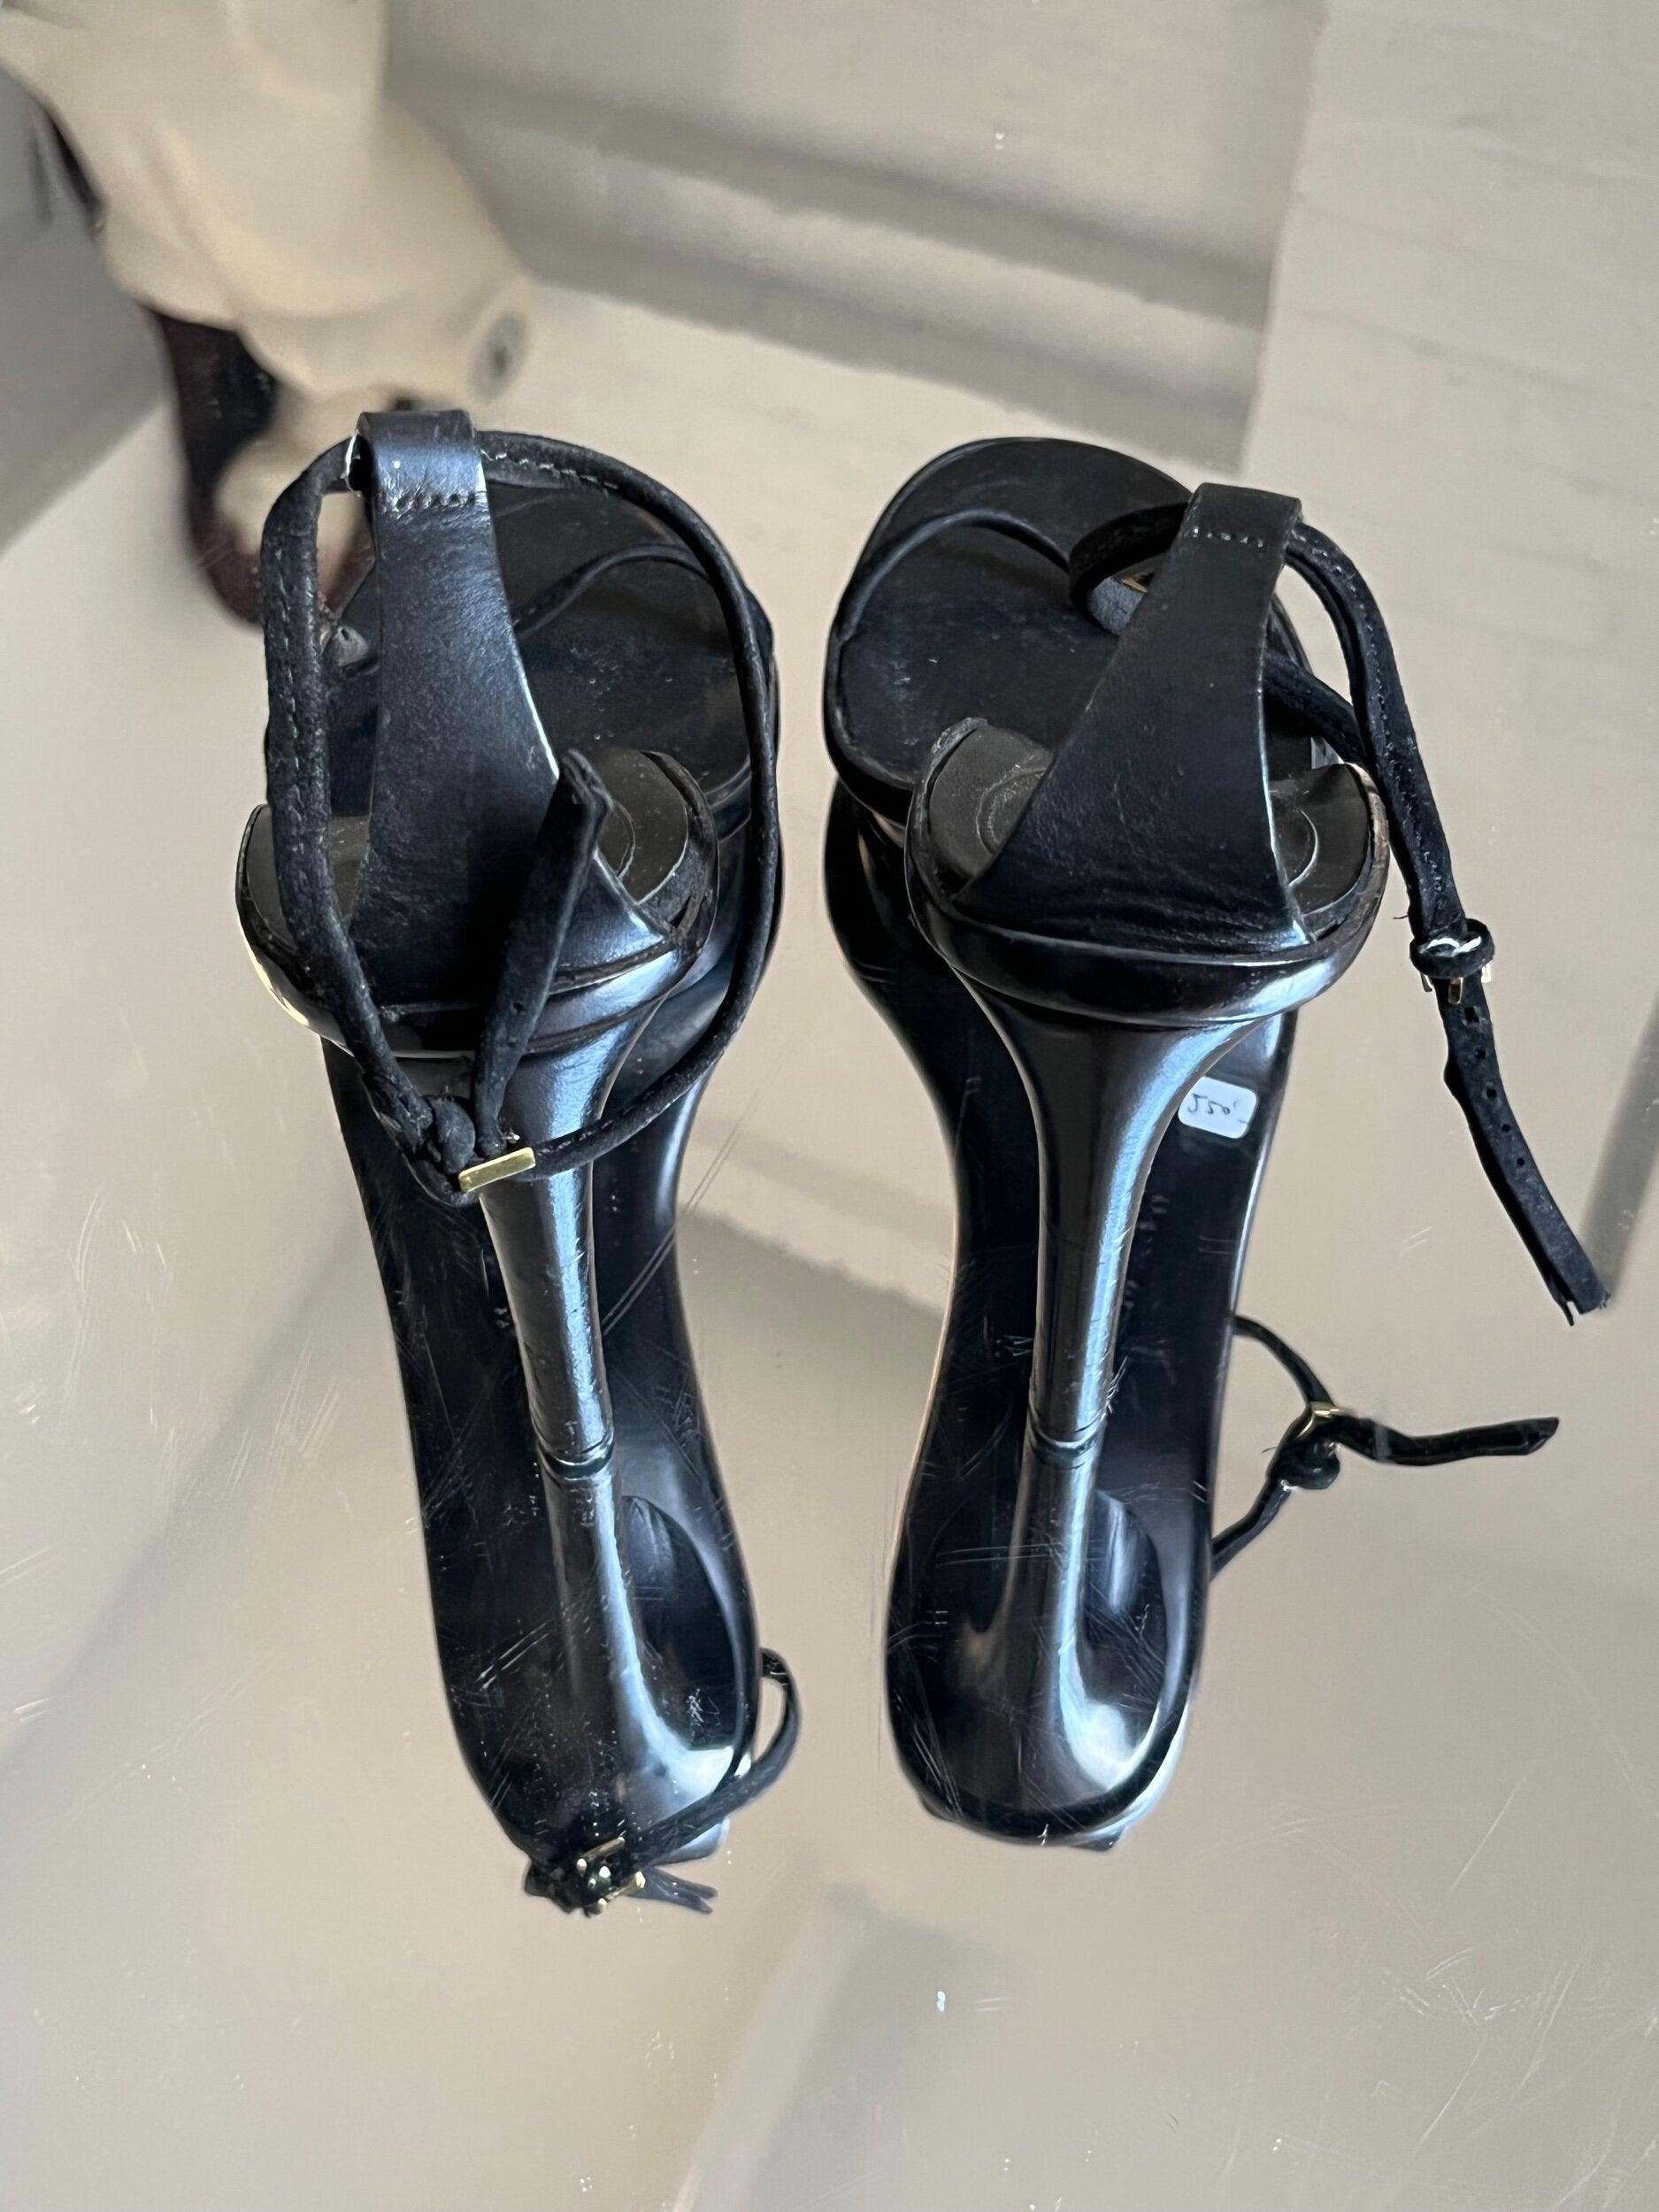 Tom Ford for Gucci heels - Known Source